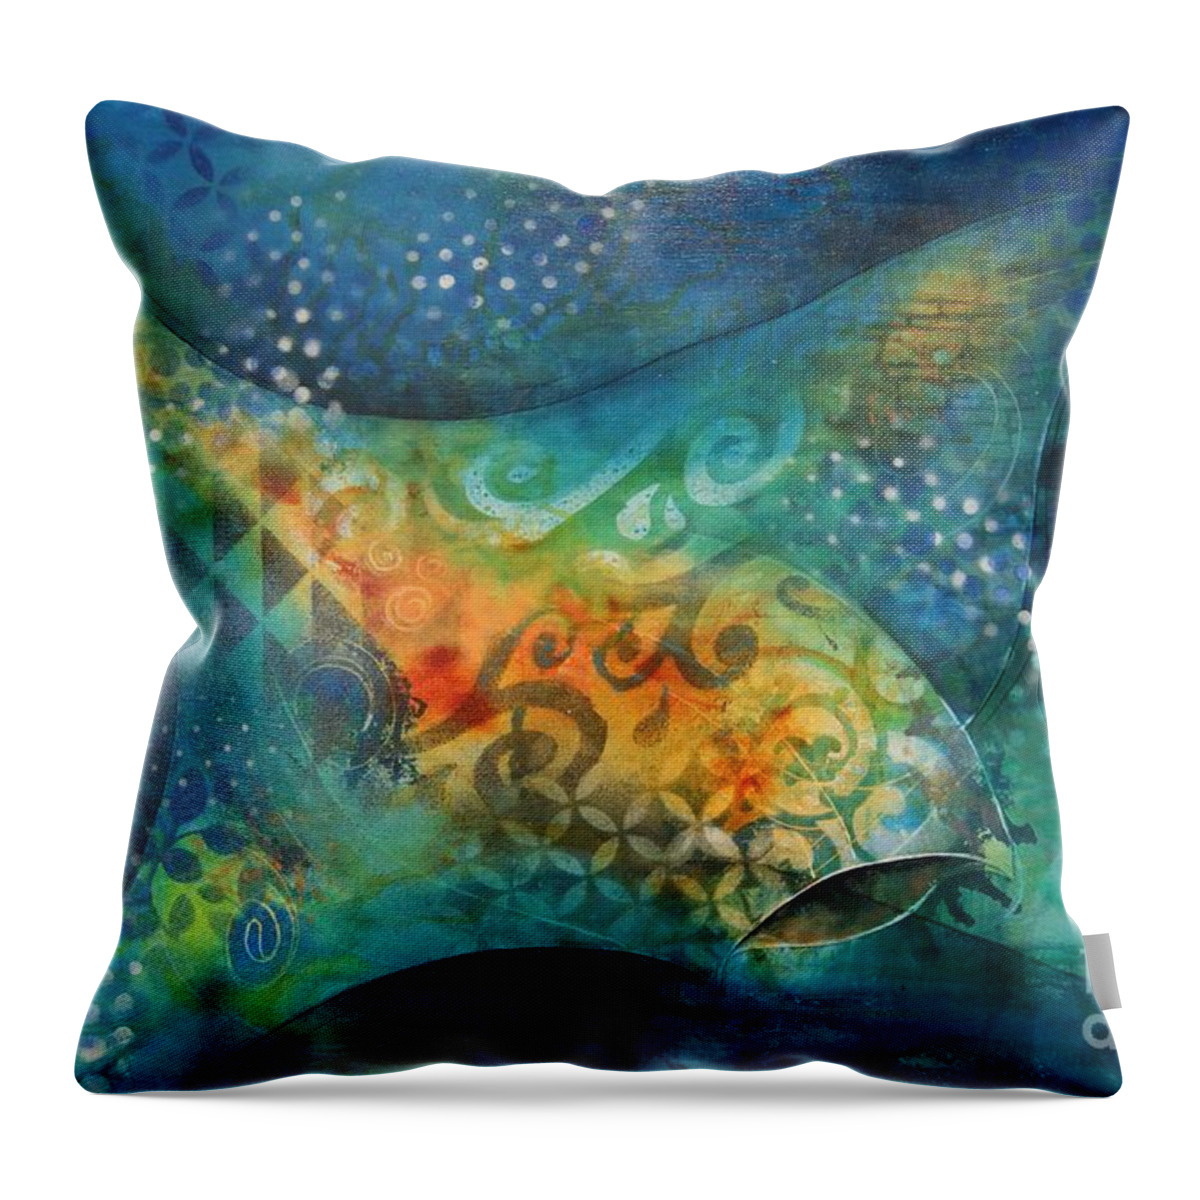 Manta Throw Pillow featuring the painting Manta Ray by Reina Cottier